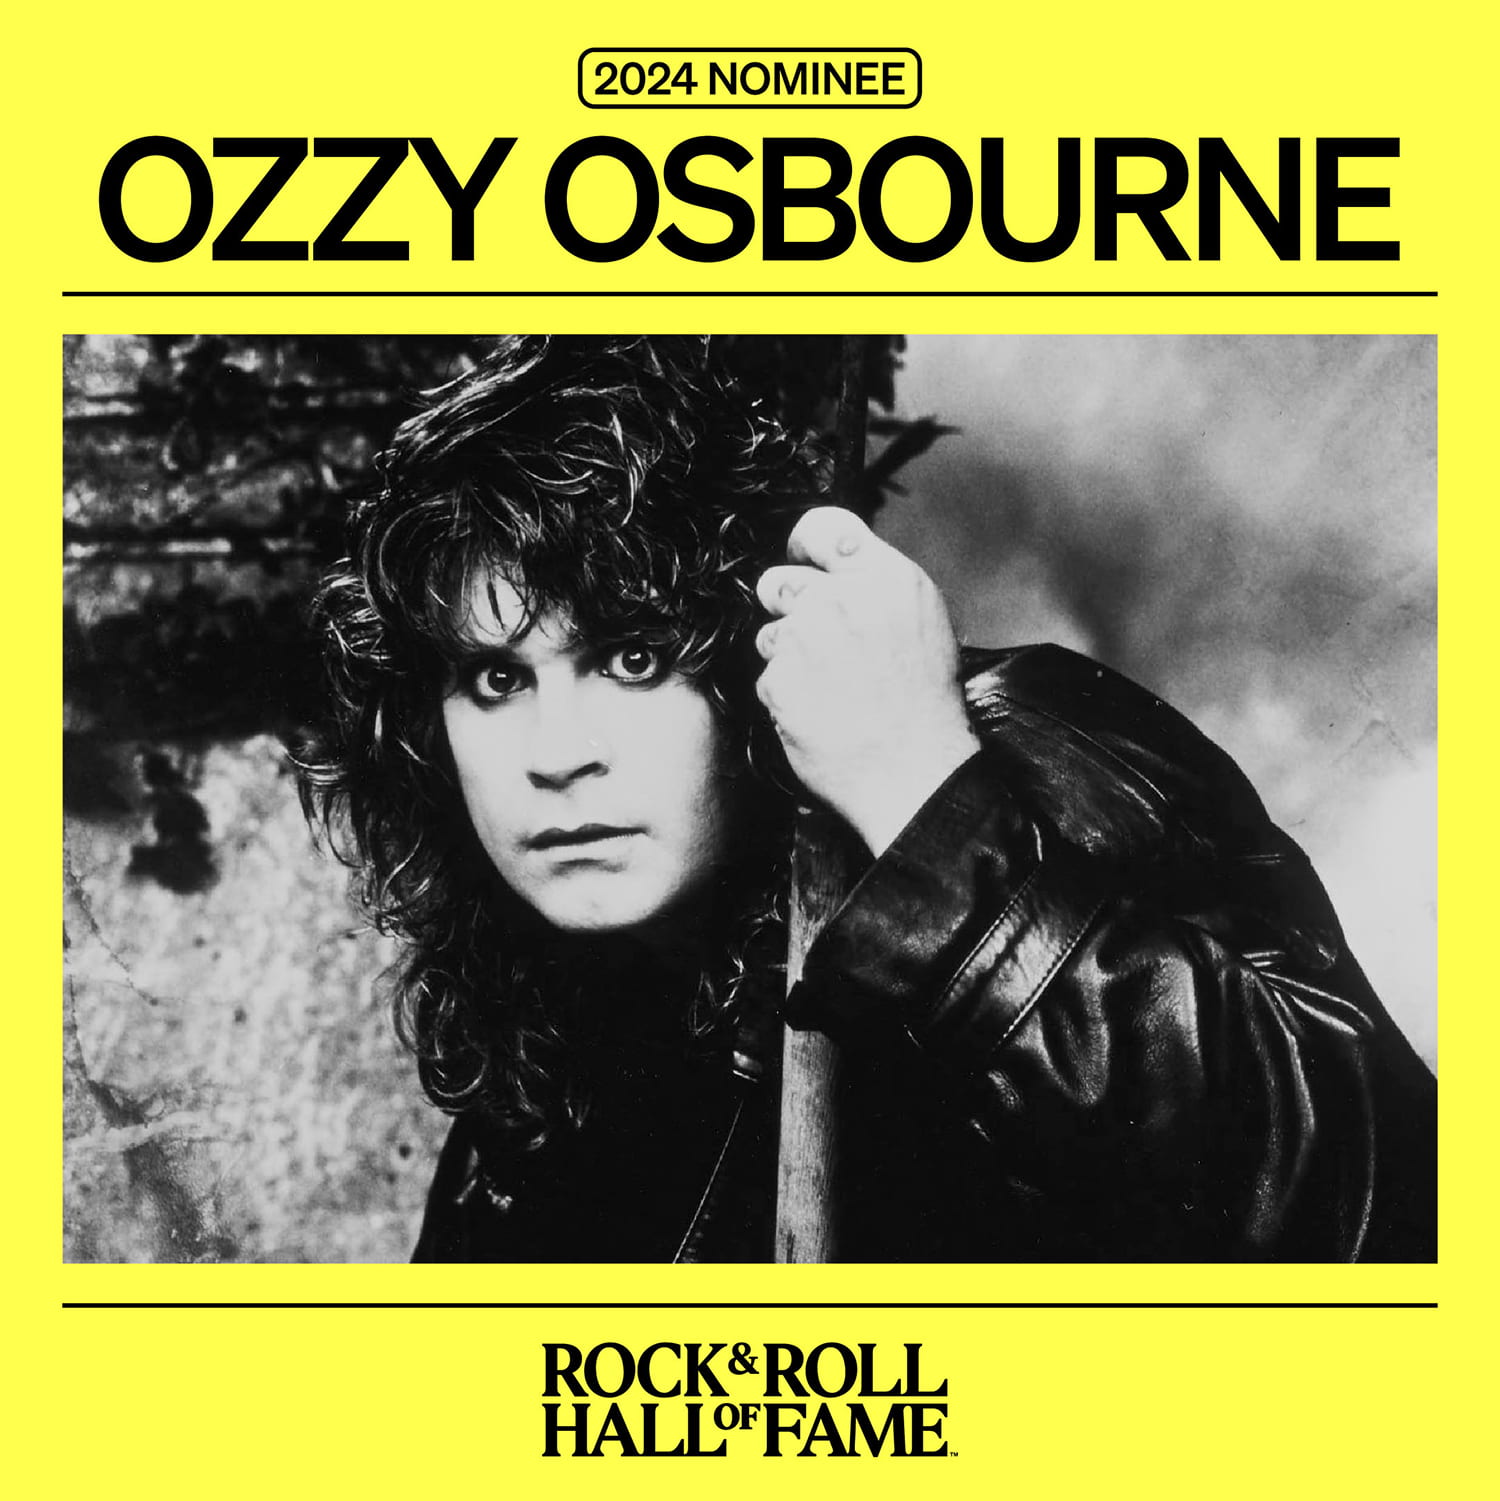 Ozzy Osbourne nominated for Rock & Roll Hall Of Fame Class of 2024